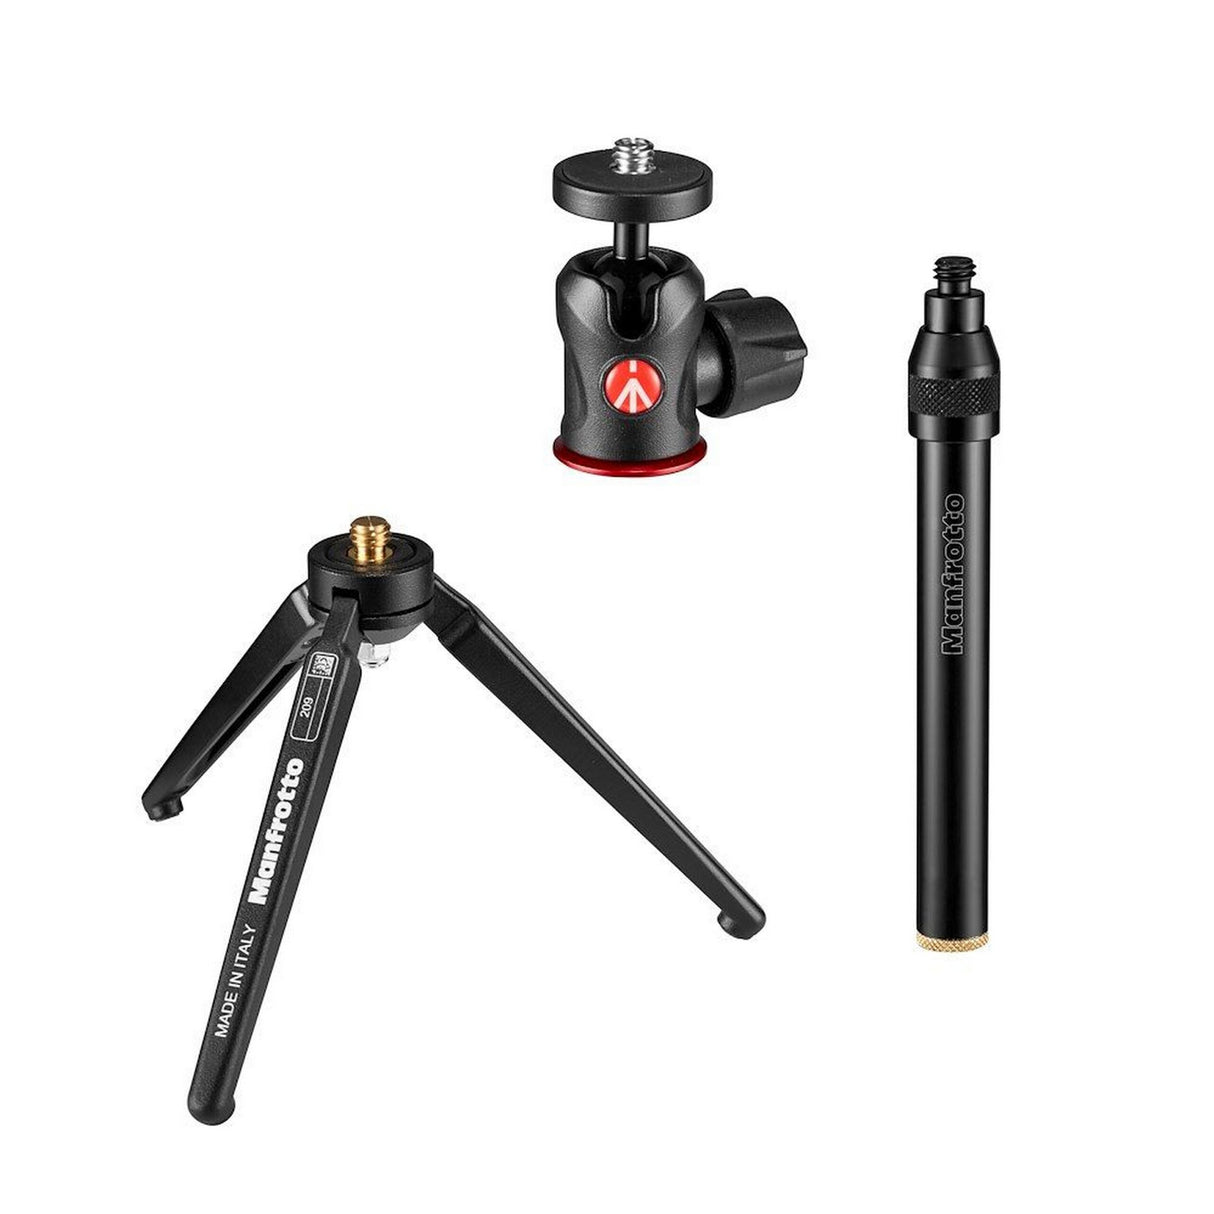 Manfrotto 209,492LONG-1 Table Top Tripod with 492 Ball Head